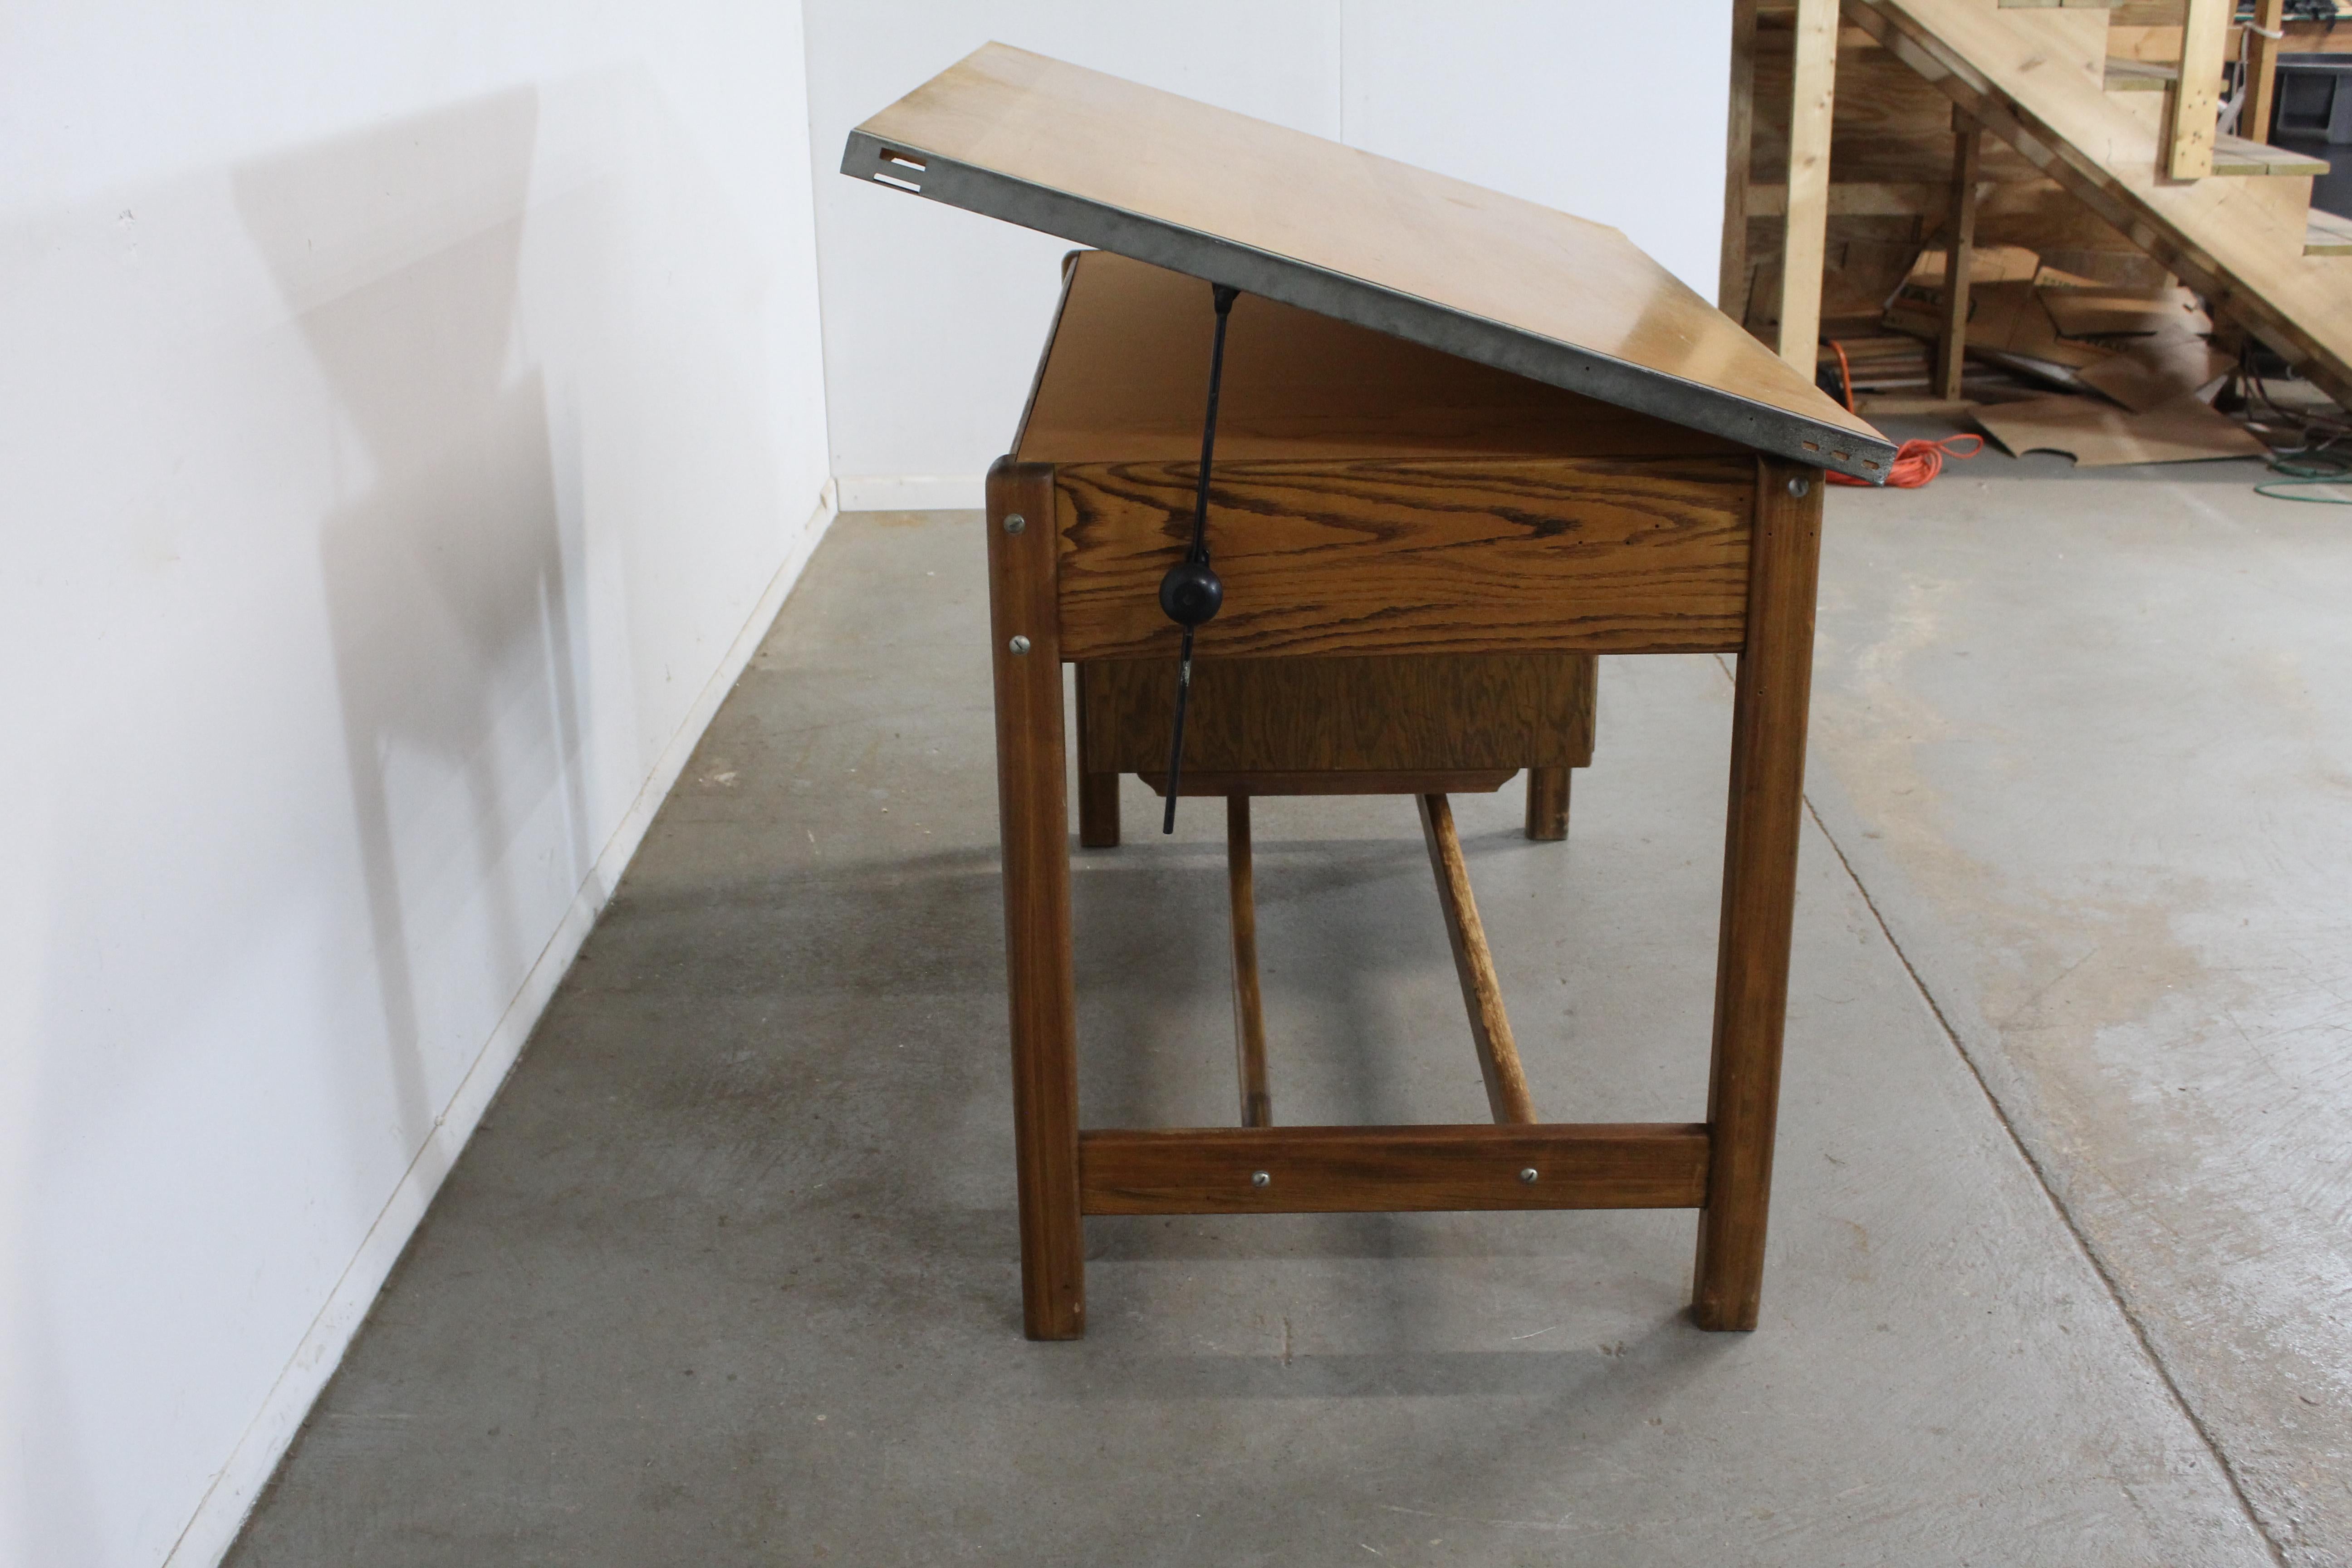 antique drafting table with drawers